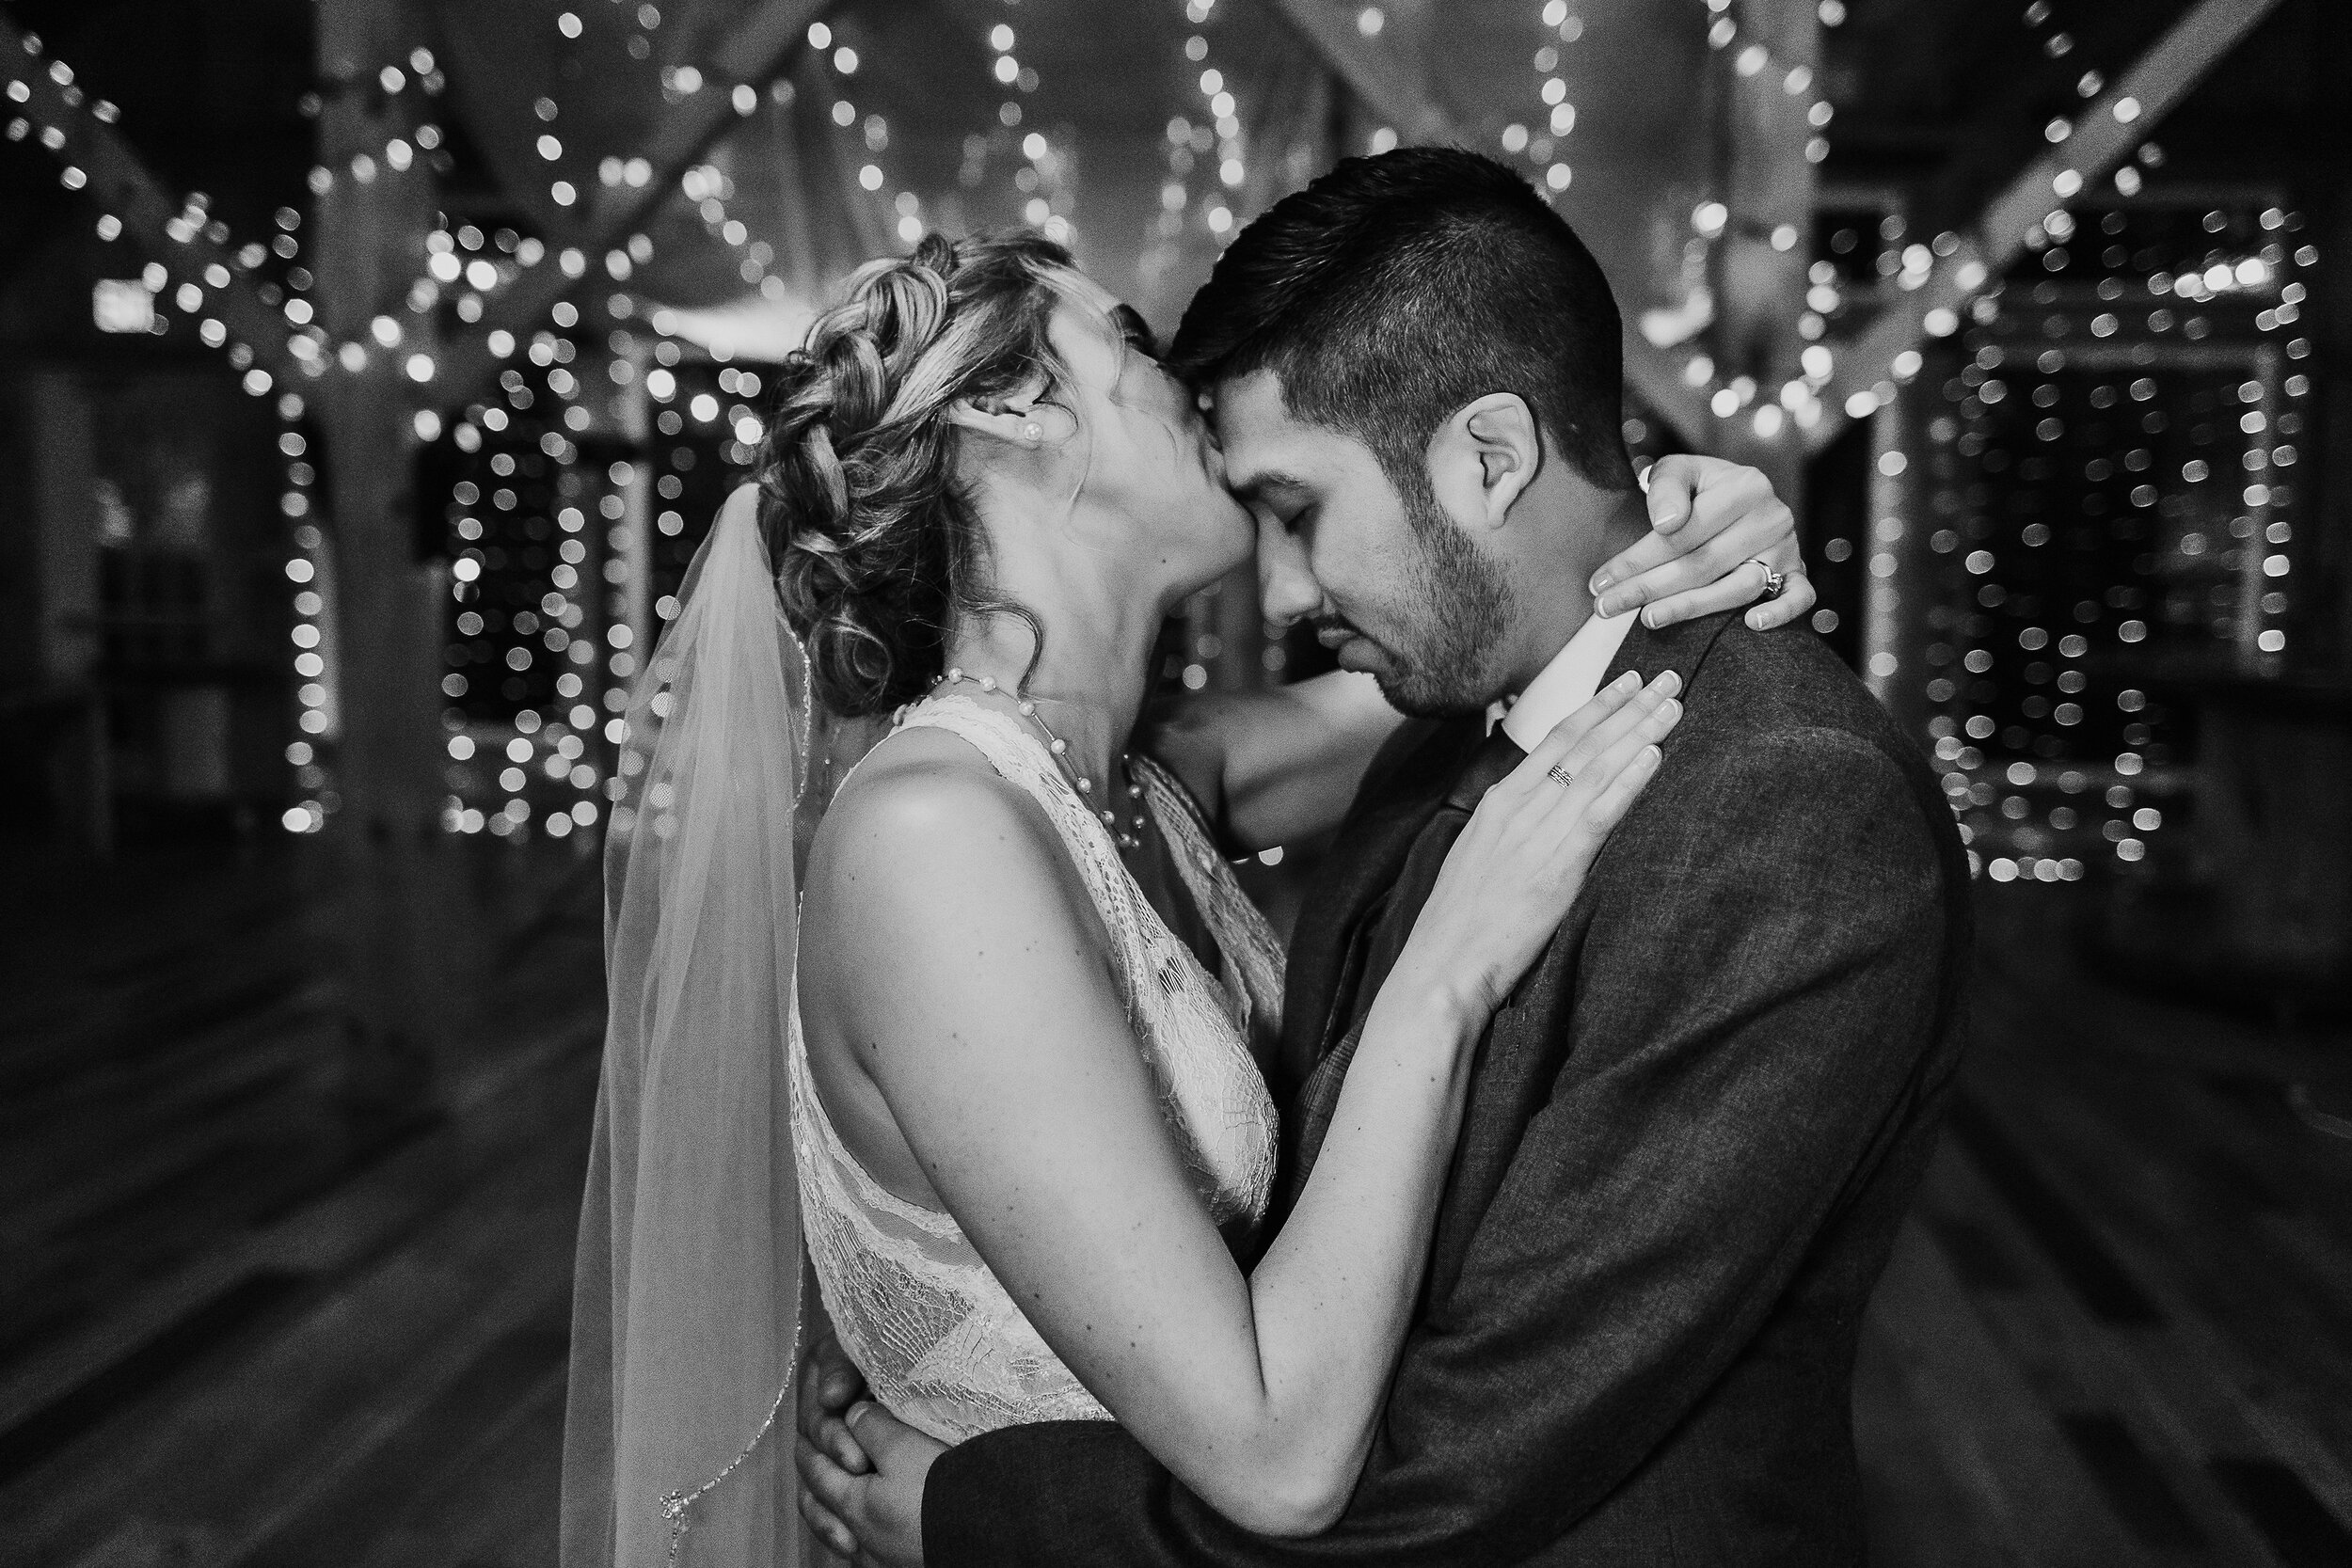  Kindred + Co. Photography captures sweet intimate moments following a romantic treehouse elopement in Akron, Ohio. slow dancing, string lights, organza ceiling wedding decor, bohemian lace wedding dress, boho wedding braid updo, forehead kissing, ar